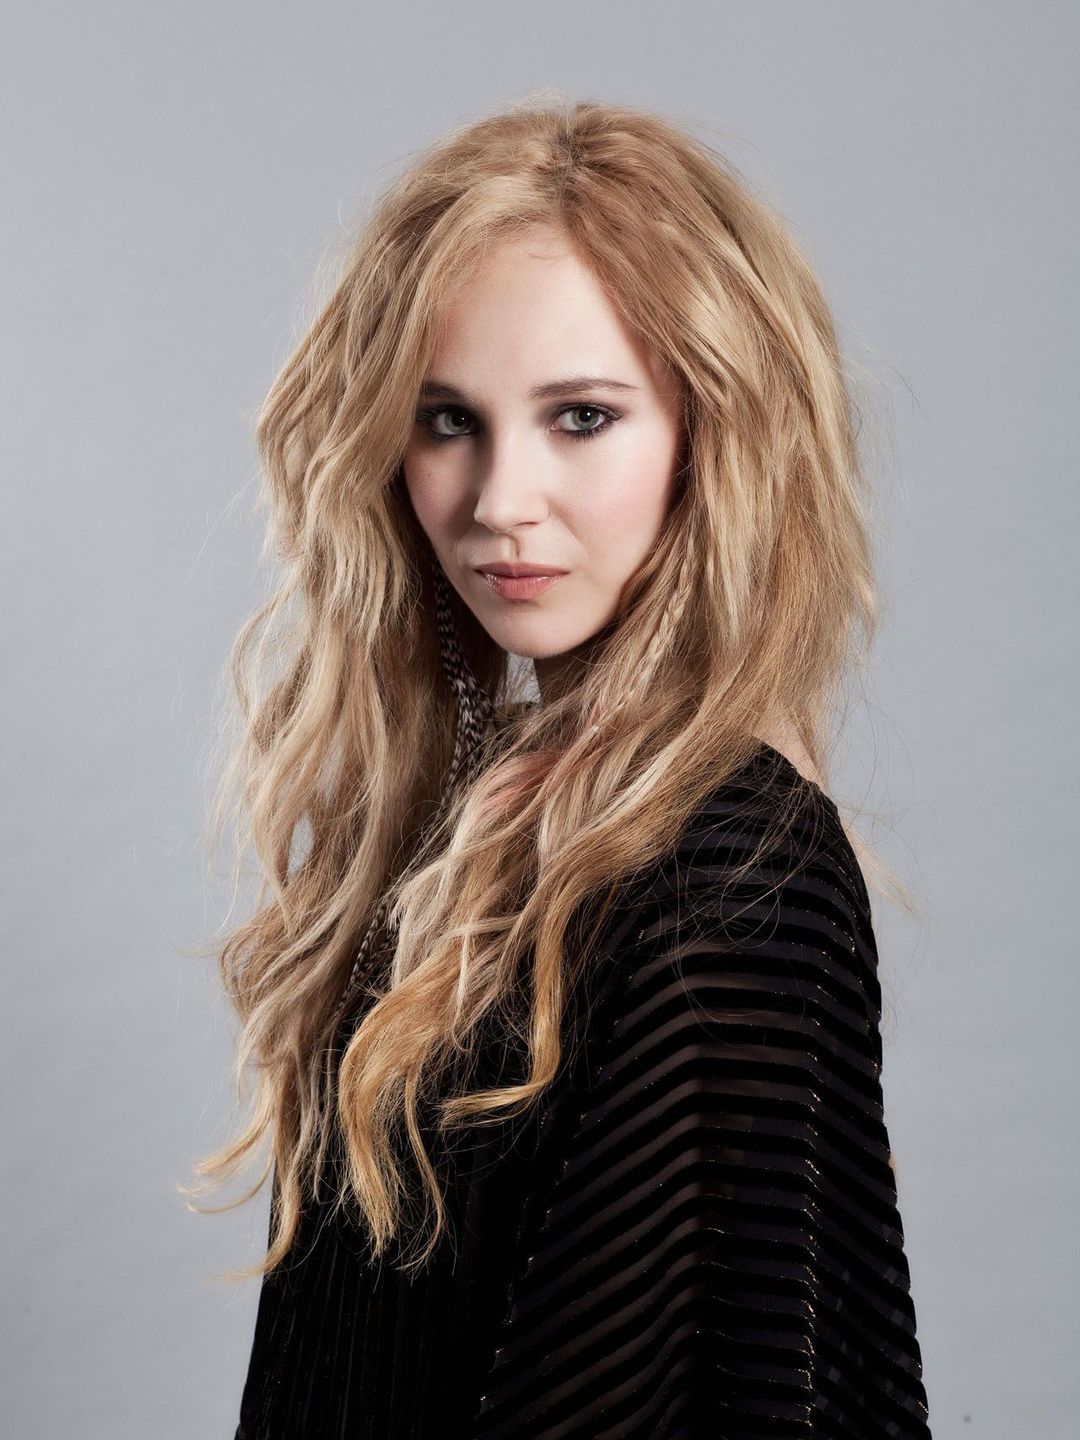 Juno Temple where does she live